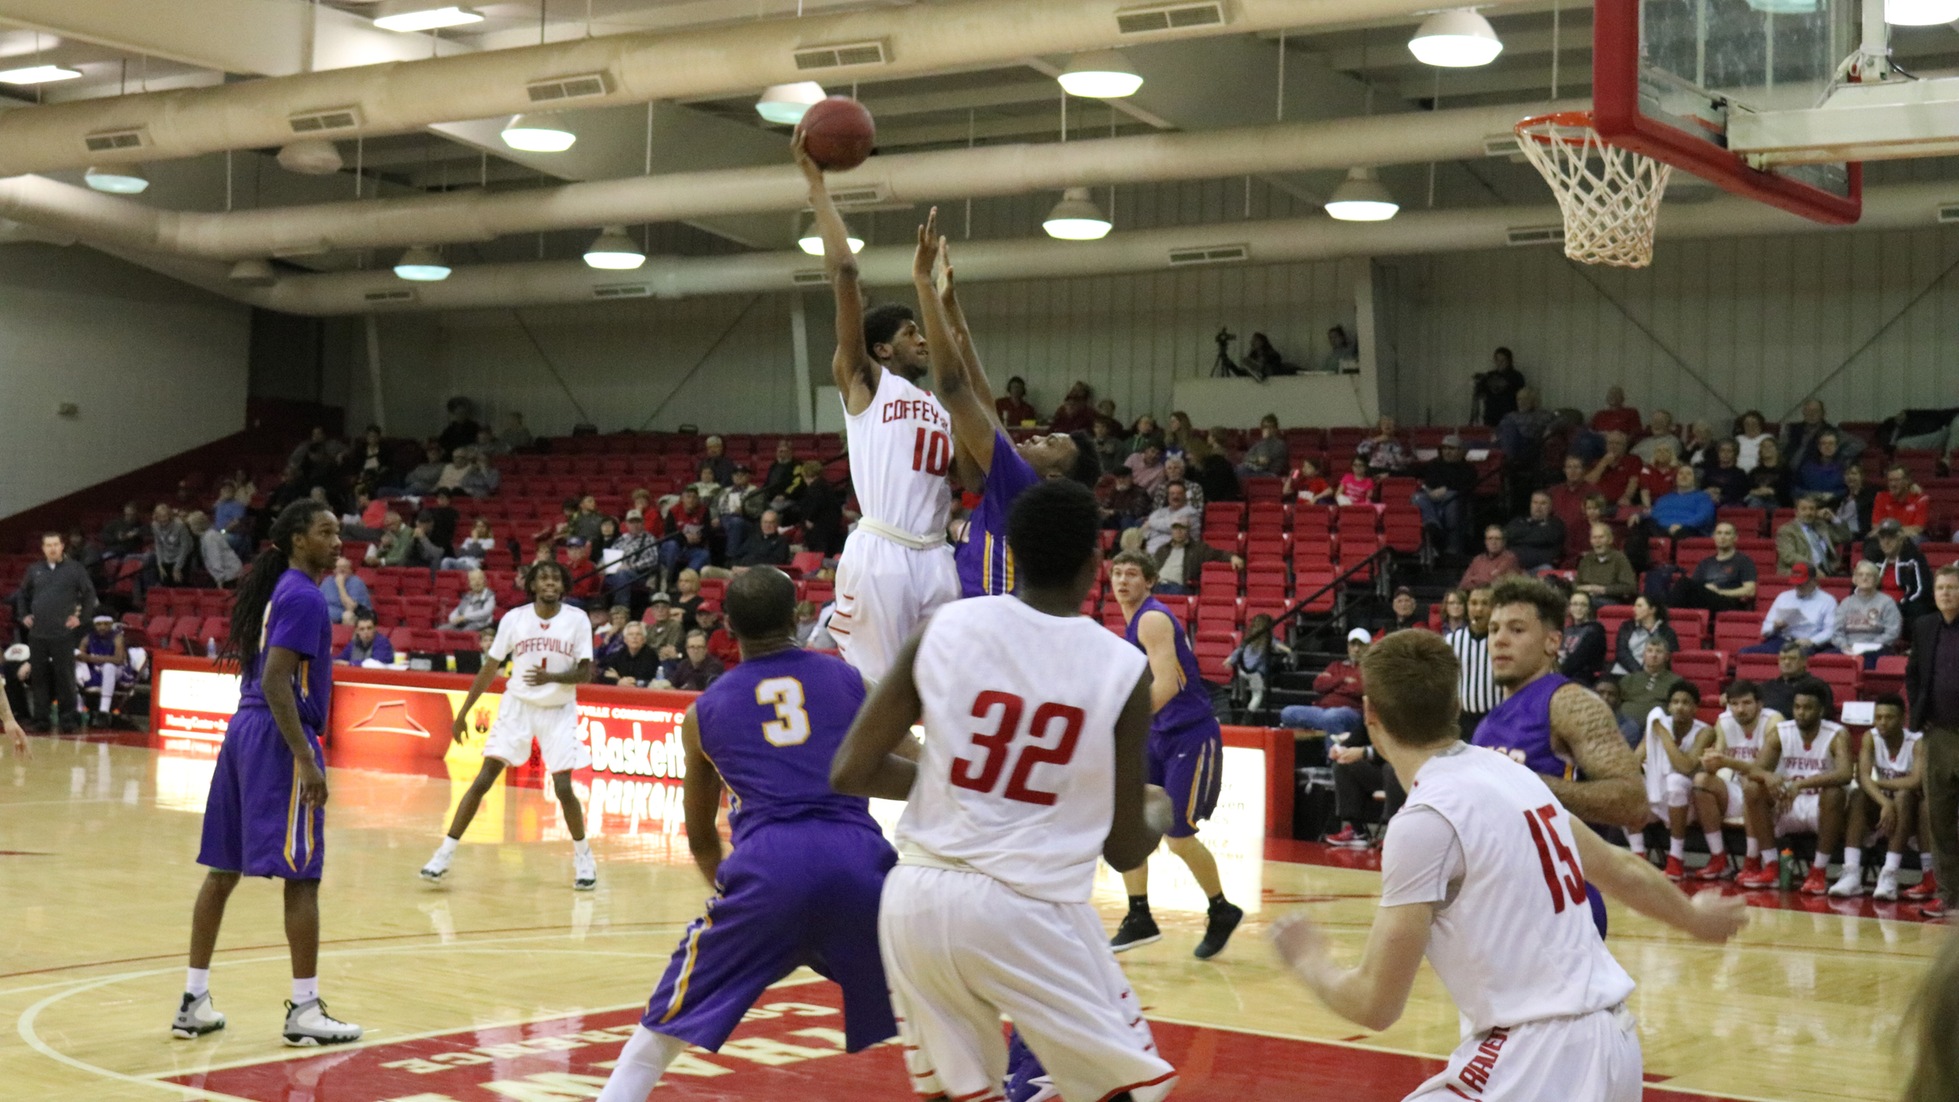 Red Raven Men Lose at Home to Dodge 73-78